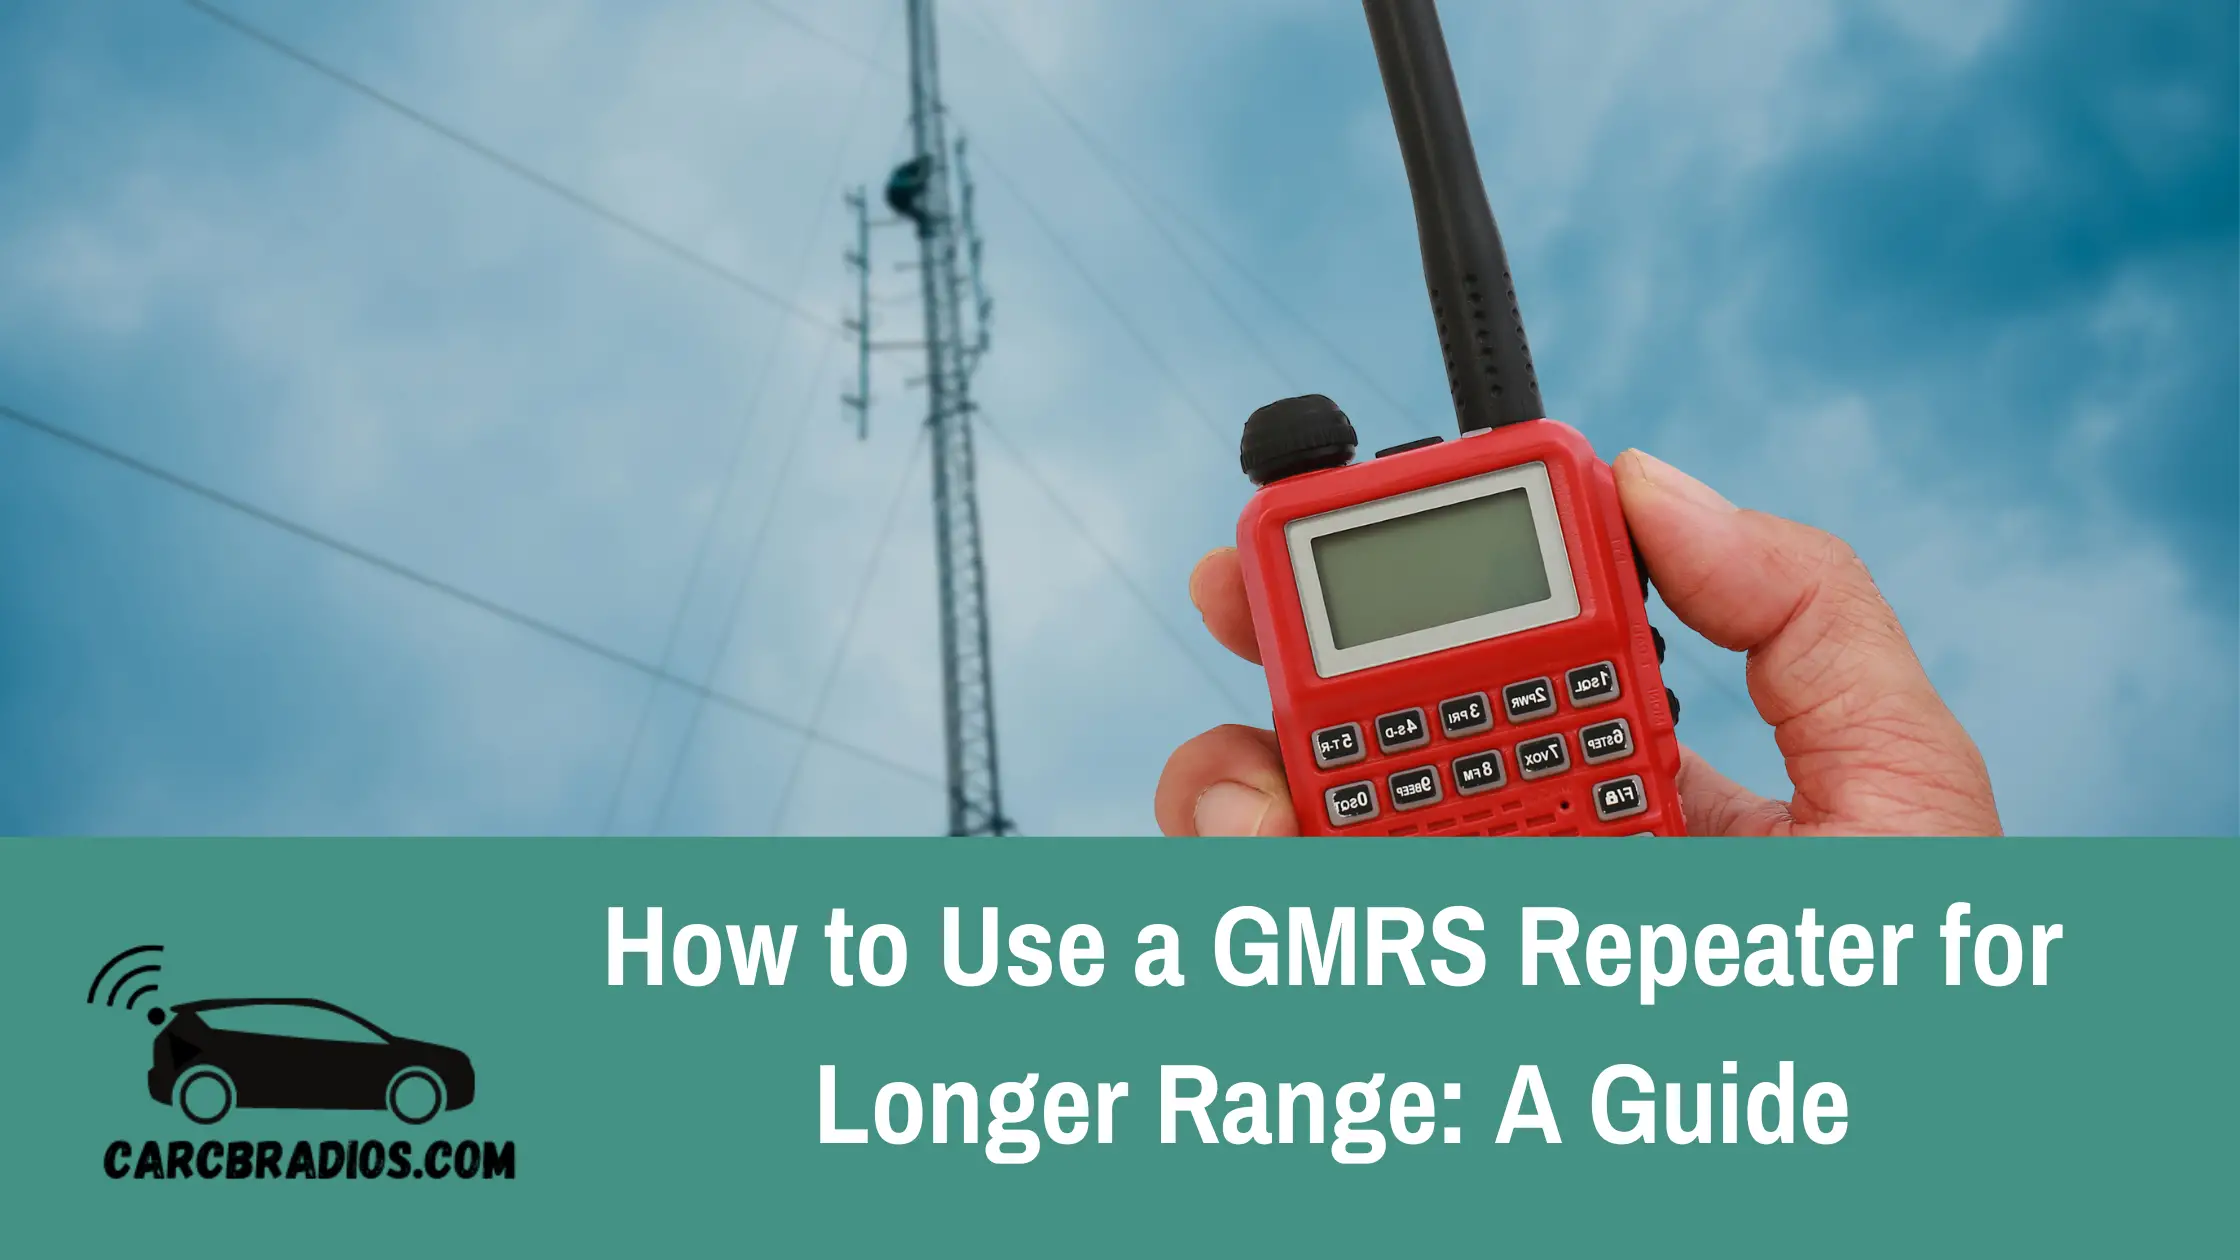 To use a GMRS repeater, your radio must have this capability built-in. This is true for fixed mount mobiles like the Midland MXT-500 and MXT-575, as well as handheld GMRS radios like the Baofeng UV-9G. While programming varies from model to model, the basic principle is that repeater channels are already set up on the radio and can be modified by the user. These channels correspond to the 8 high power GMRS channels on the receive side, but when using them your radio transmits on an offset frequency that's 5 MHz higher. It may sound complicated, but once you understand the basics, it's easy to set up and use these features.